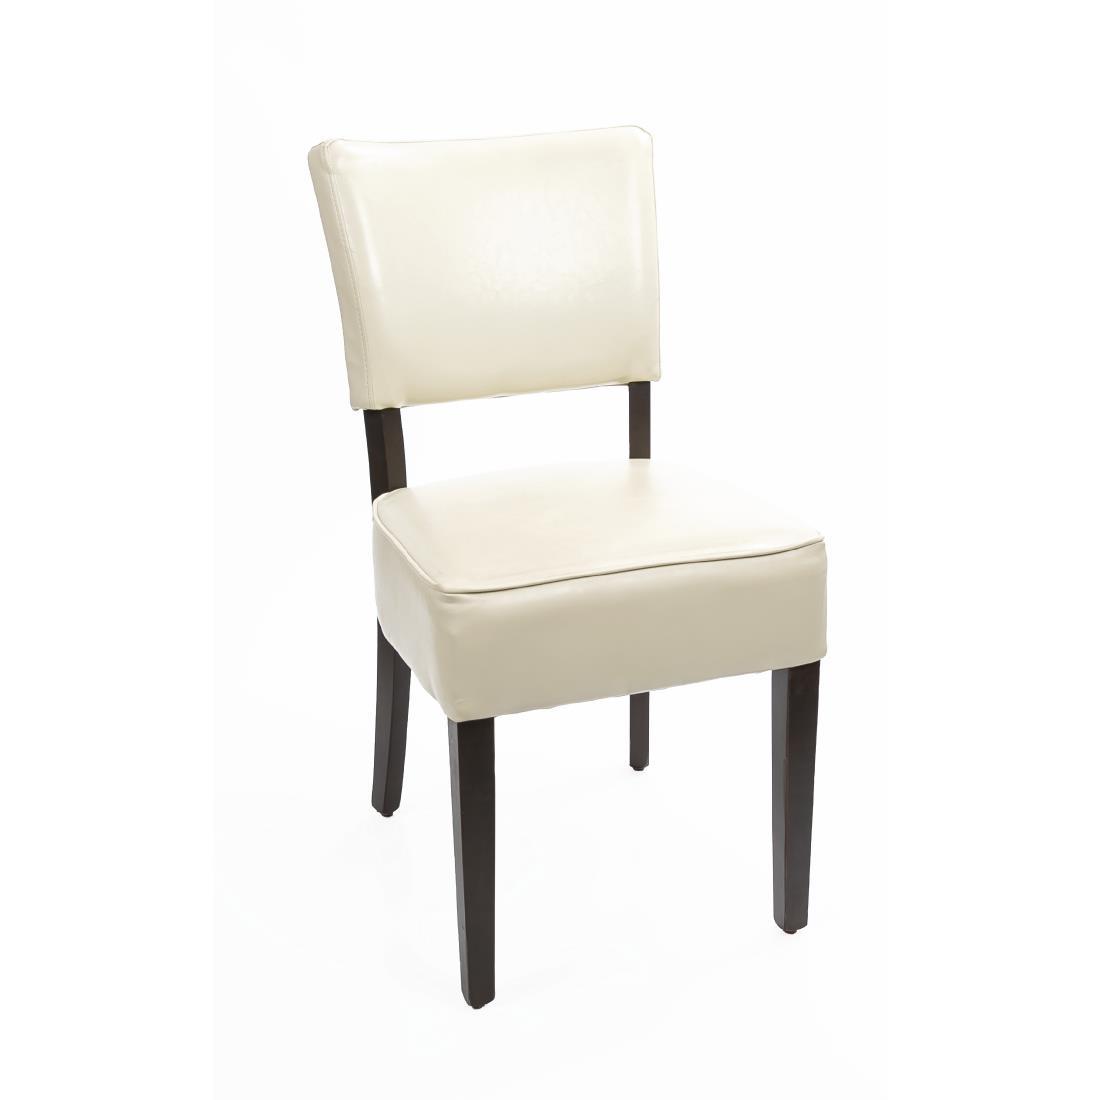 Bolero Chunky Faux Leather Chairs Cream (Pack of 2) - GF958  - 1